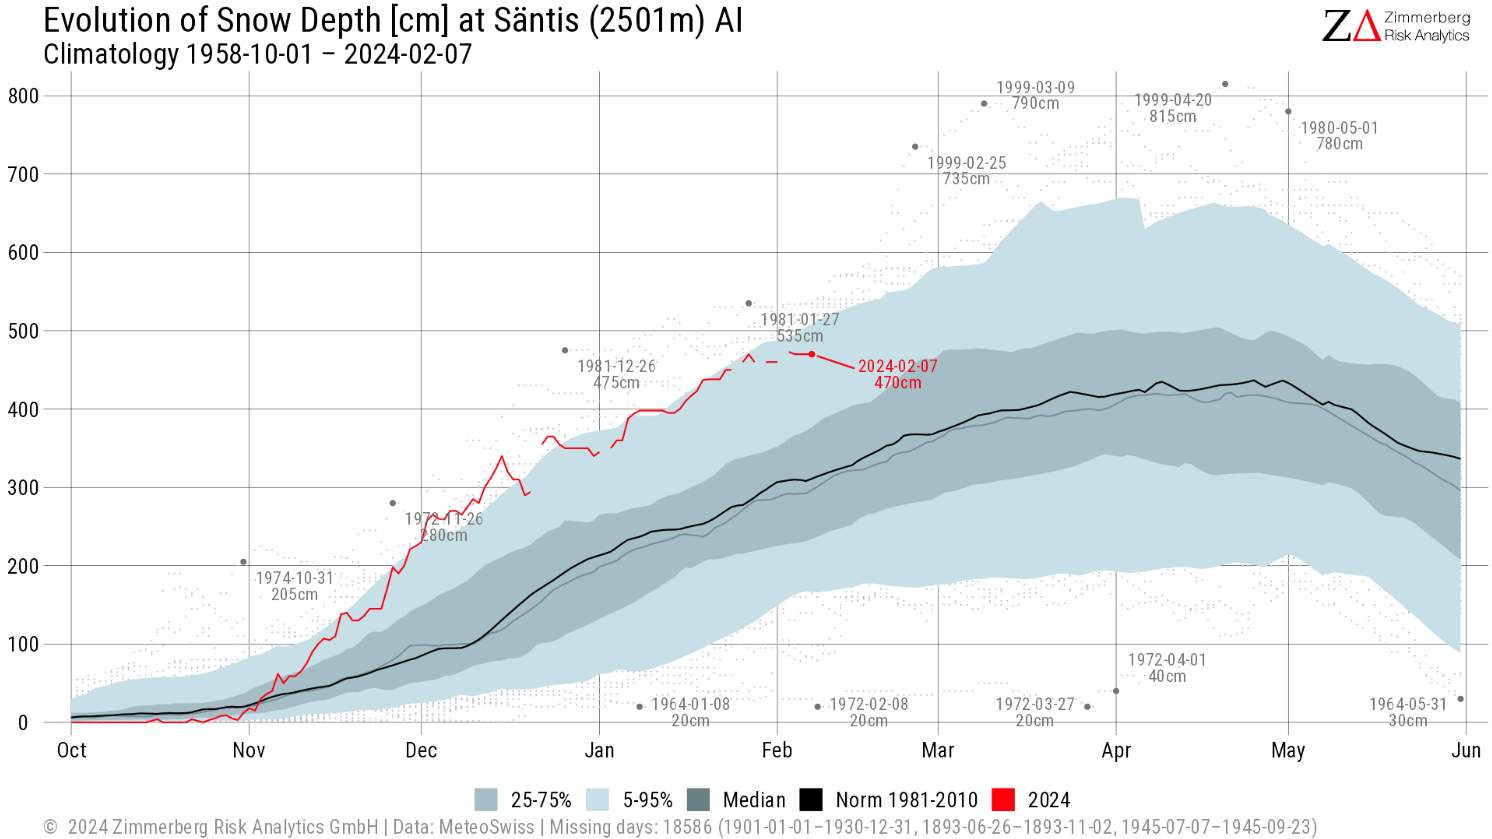 Fig. 2: Development of snow depth on the Säntis compared to historical mean and extreme values; Source: Zimmerberg Risk Analytics, myweather.ch